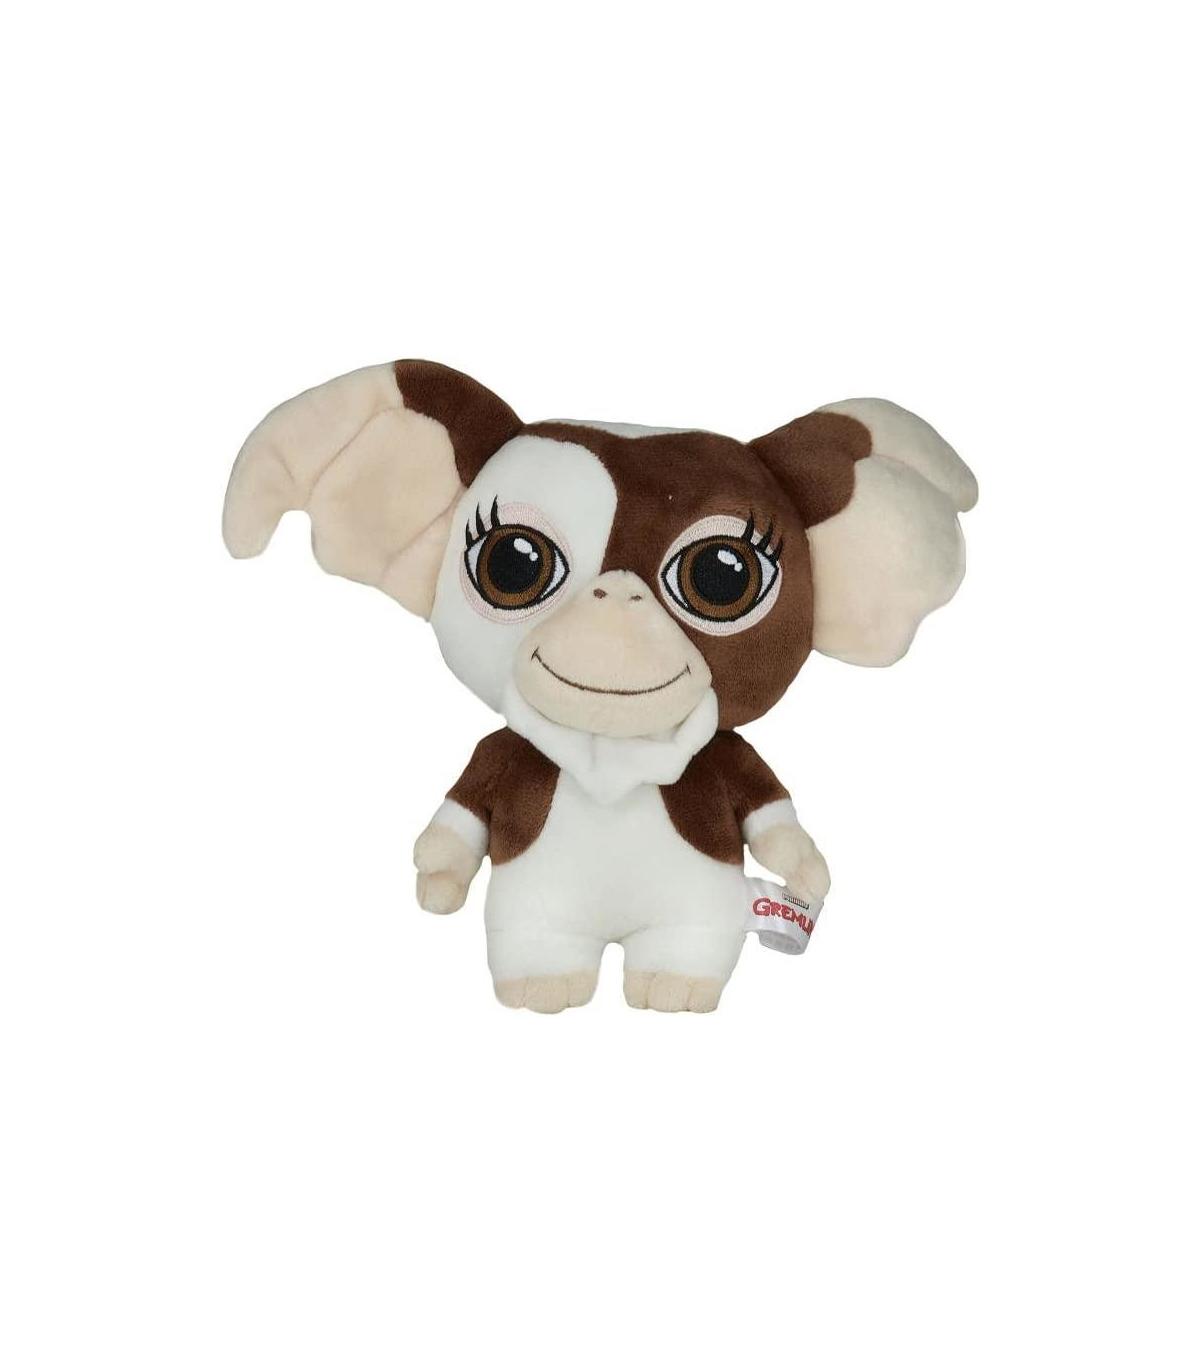 GREMLINS - Peluche DANCING GIZMO with Sound - 20cm